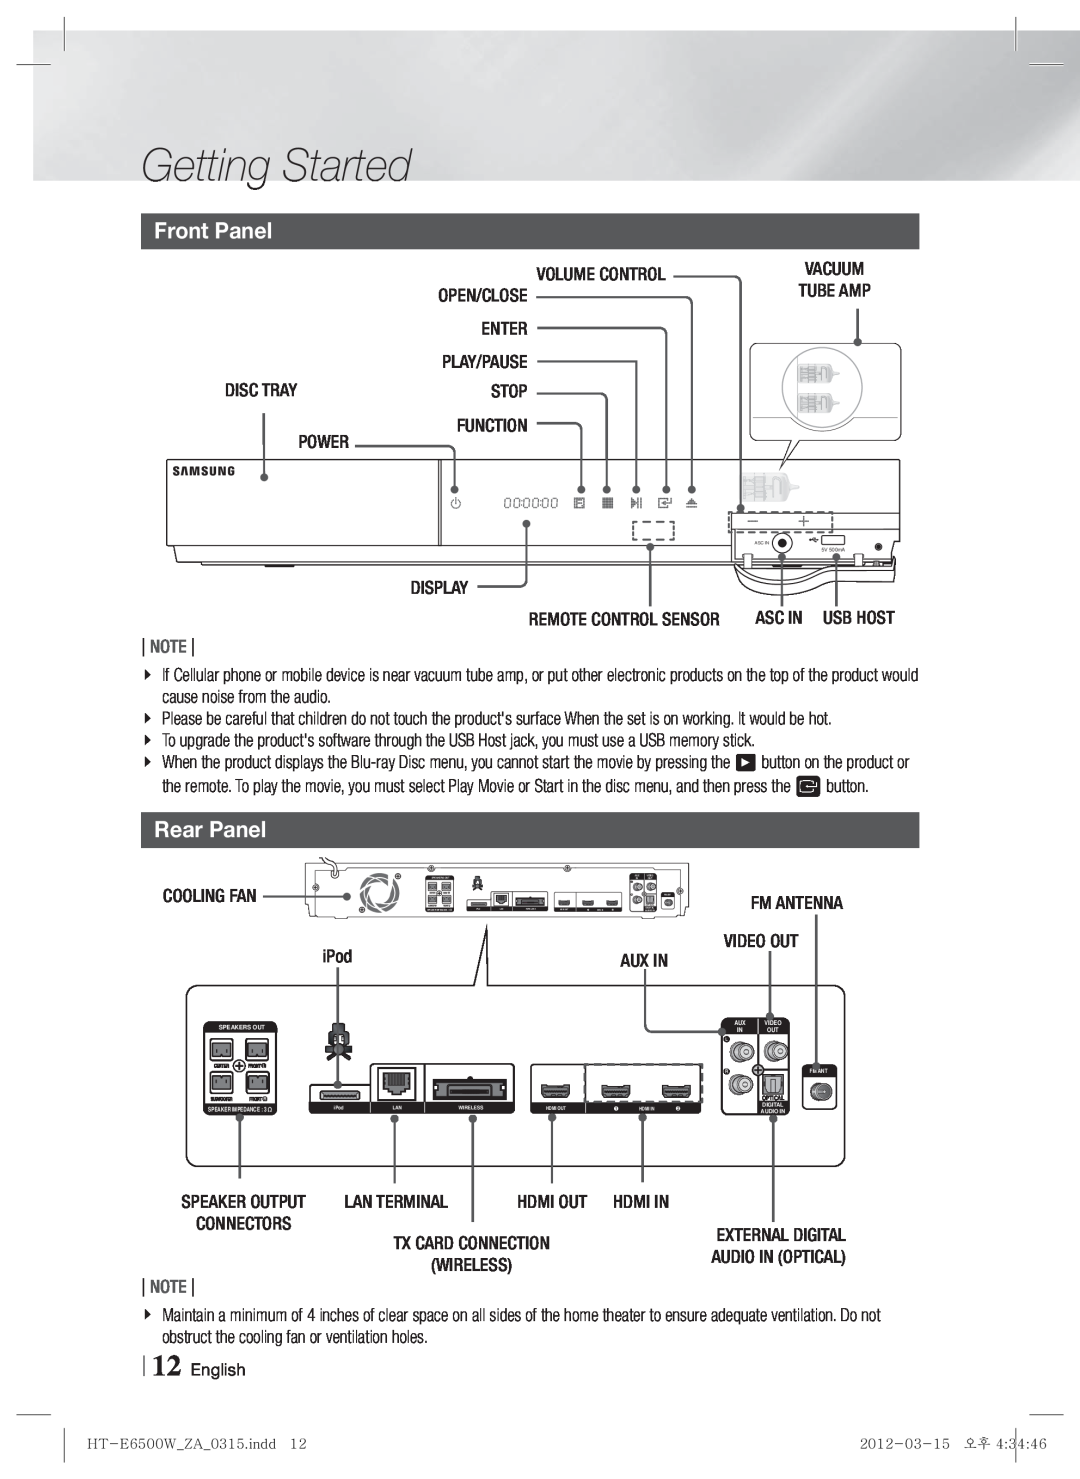 Samsung HT-E6500W, HTE6500WZA user manual Front Panel, Rear Panel, Getting Started, Note 